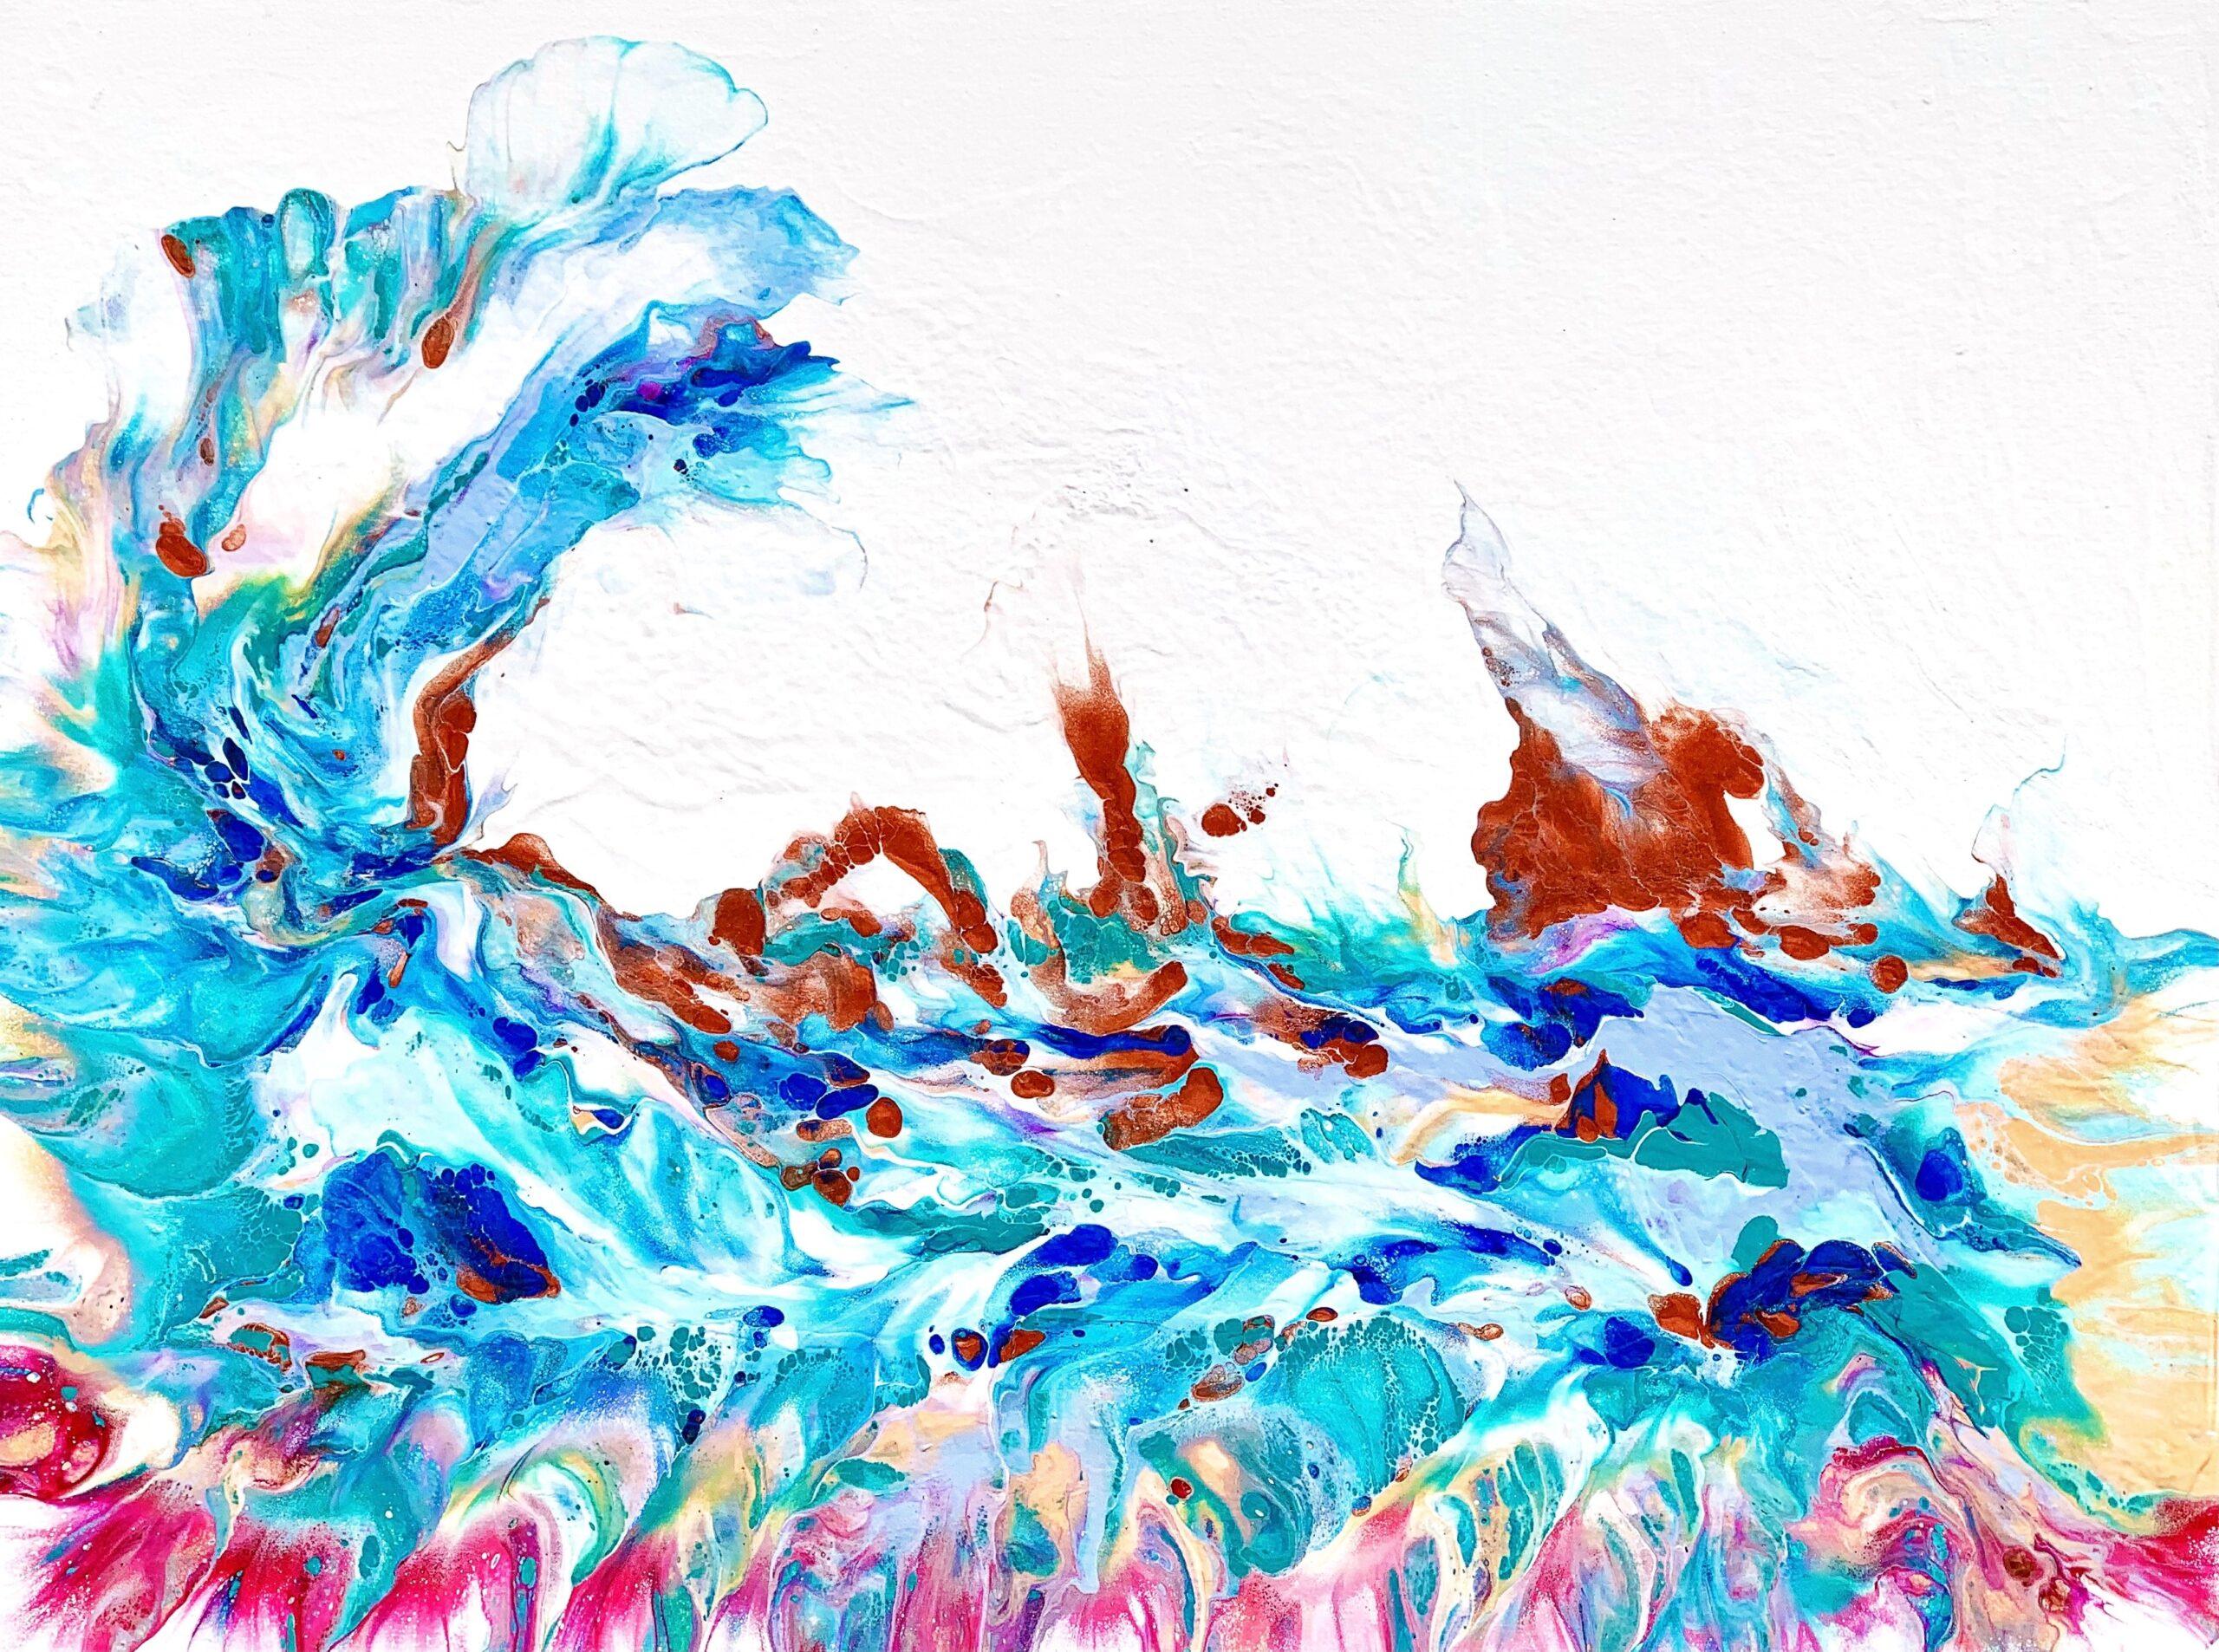 Coastal Wave by Ashton Lally - Painting by Unknown